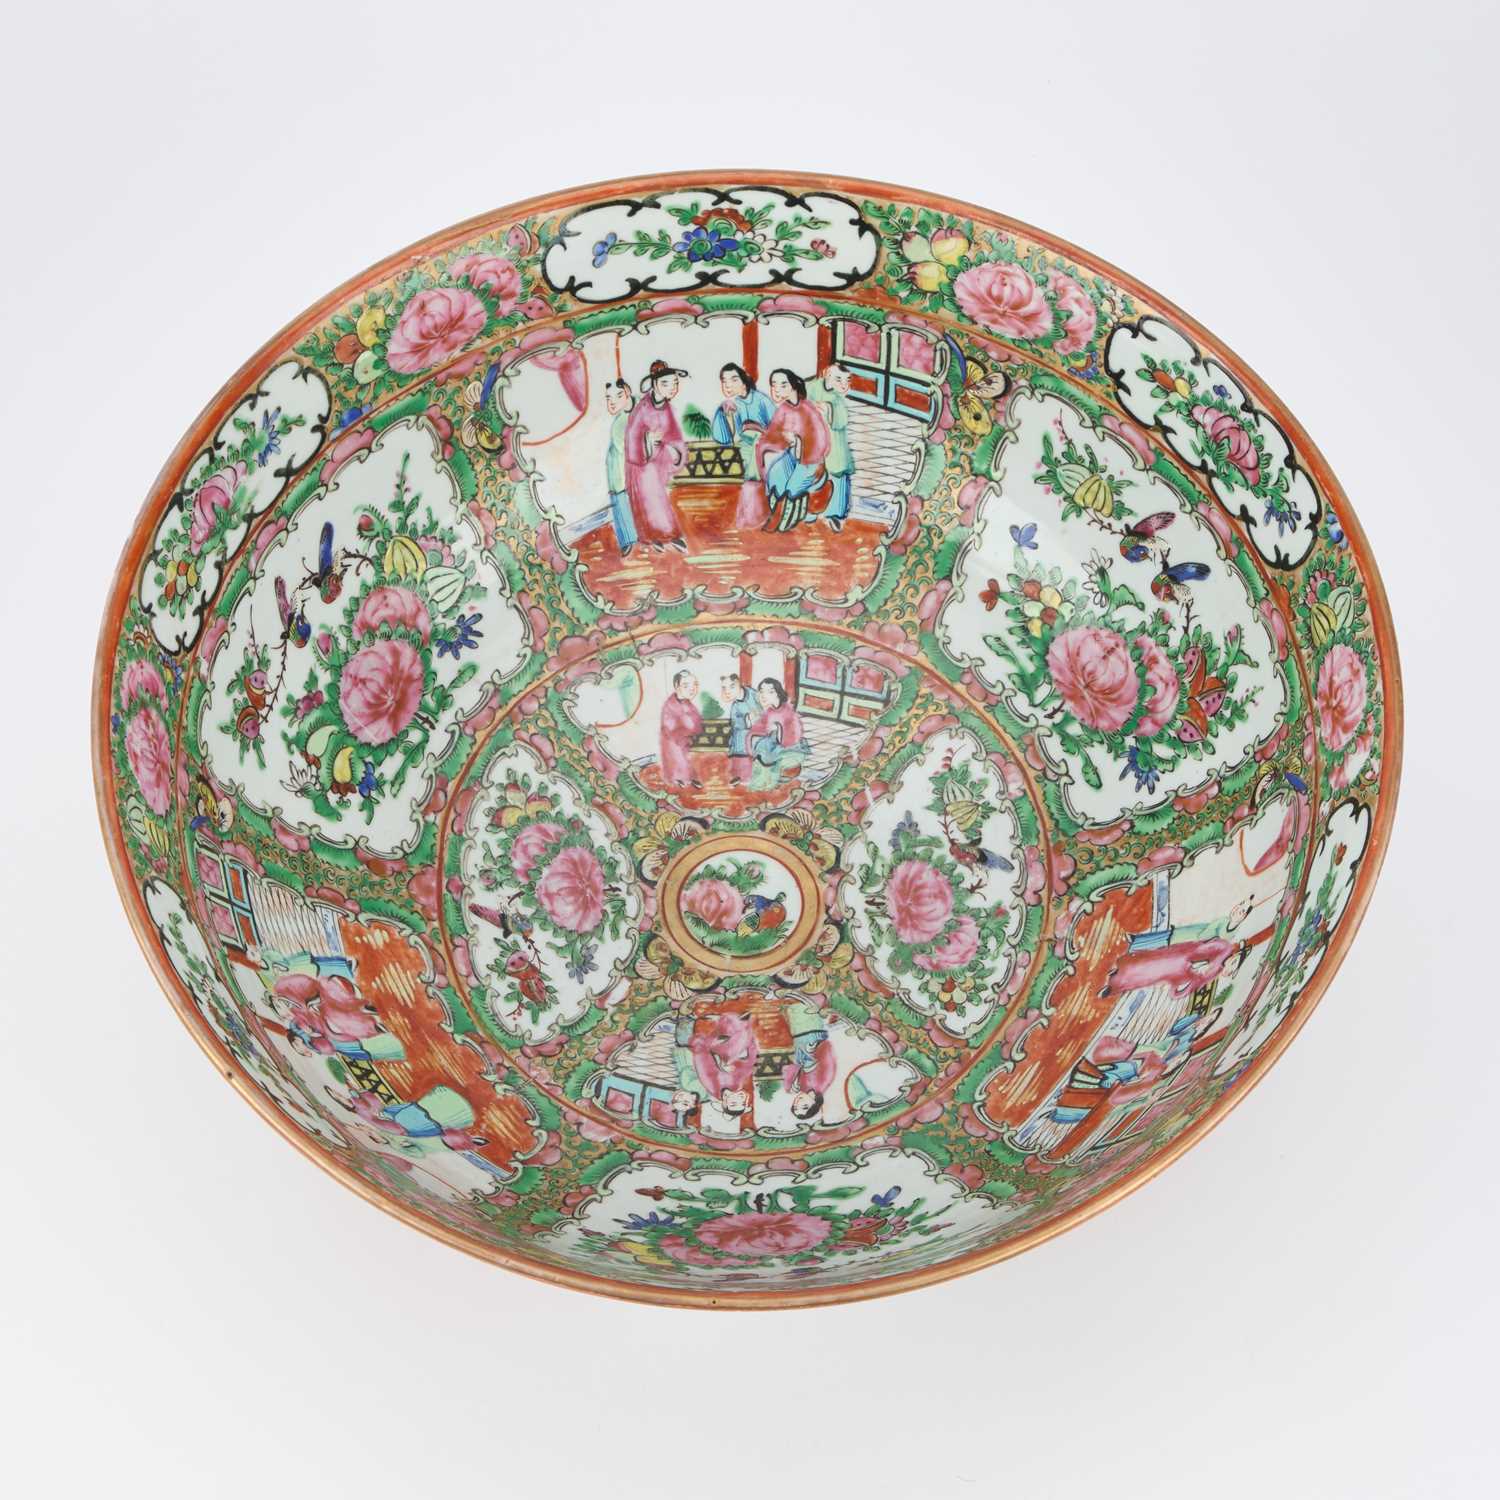 A CHINESE CANTON FAMILLE ROSE PUNCH BOWL, LATE 19TH/ EARLY 20TH CENTURY - Image 2 of 3